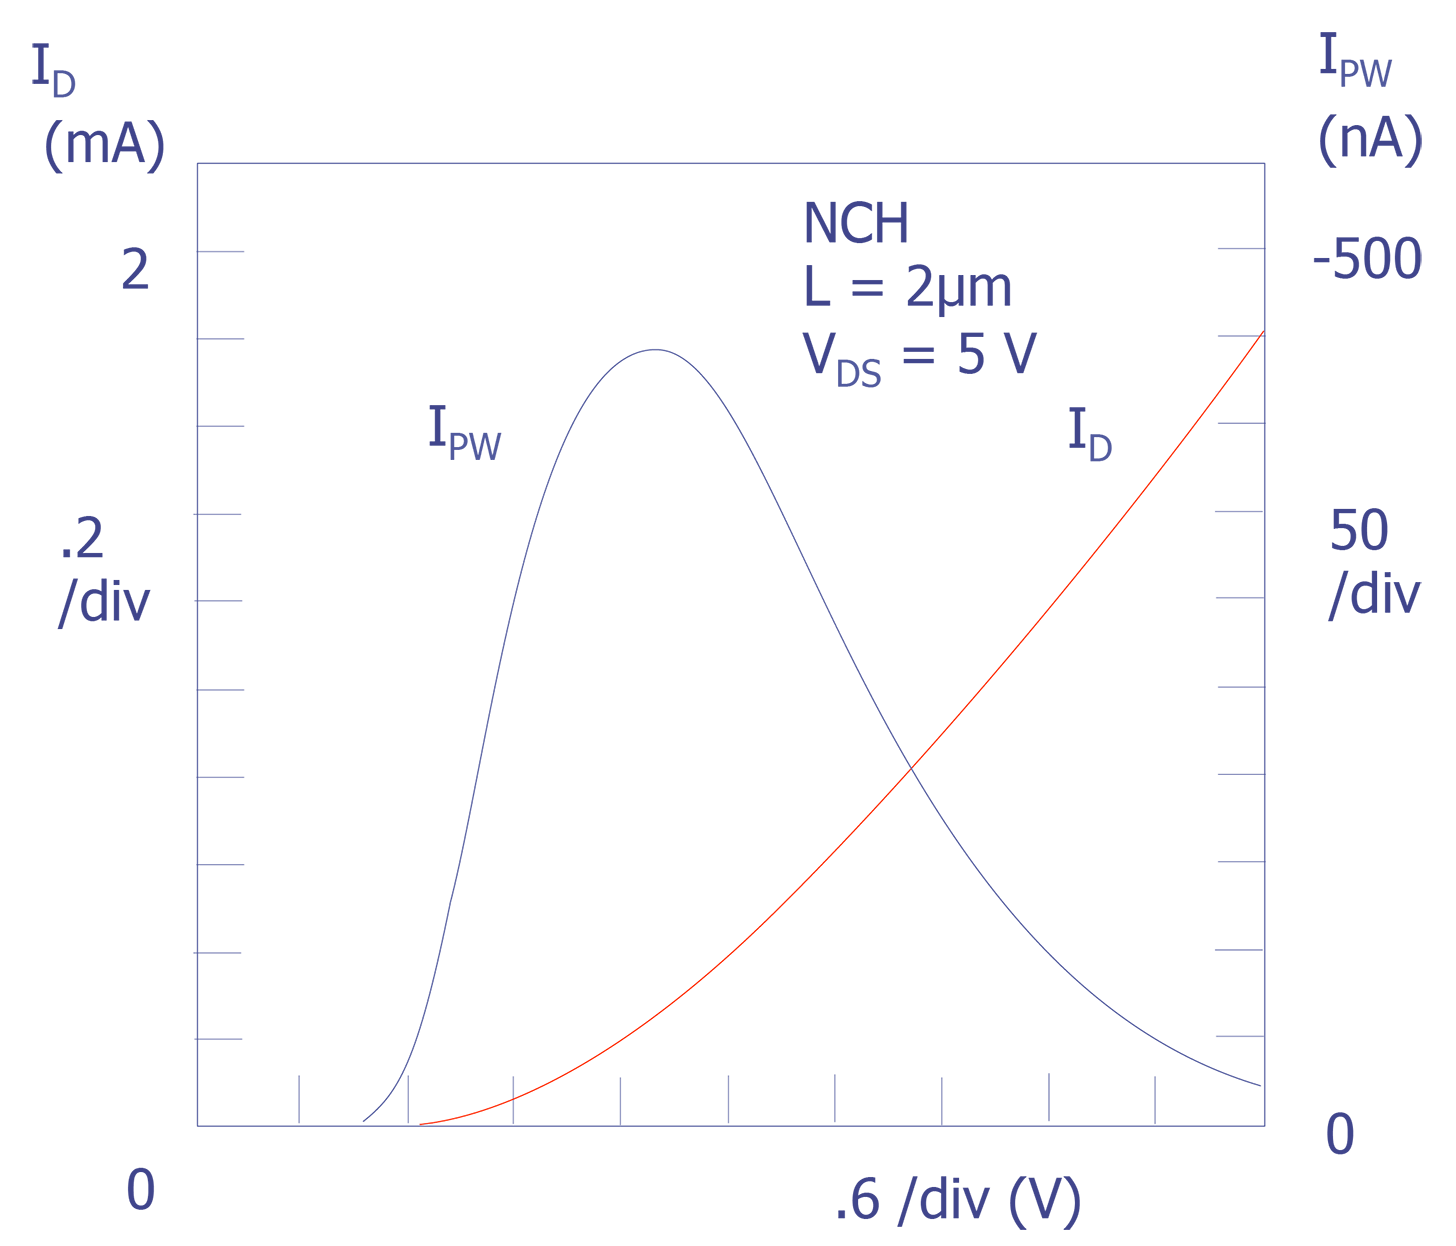 I<sub>D</sub> (red) I<sub>PW</sub> (blue) as functions of V<sub>GS</sub>(V<sub>DS</sub> = 5 V) for an n-channel transistor with a channel length of 2 µm.